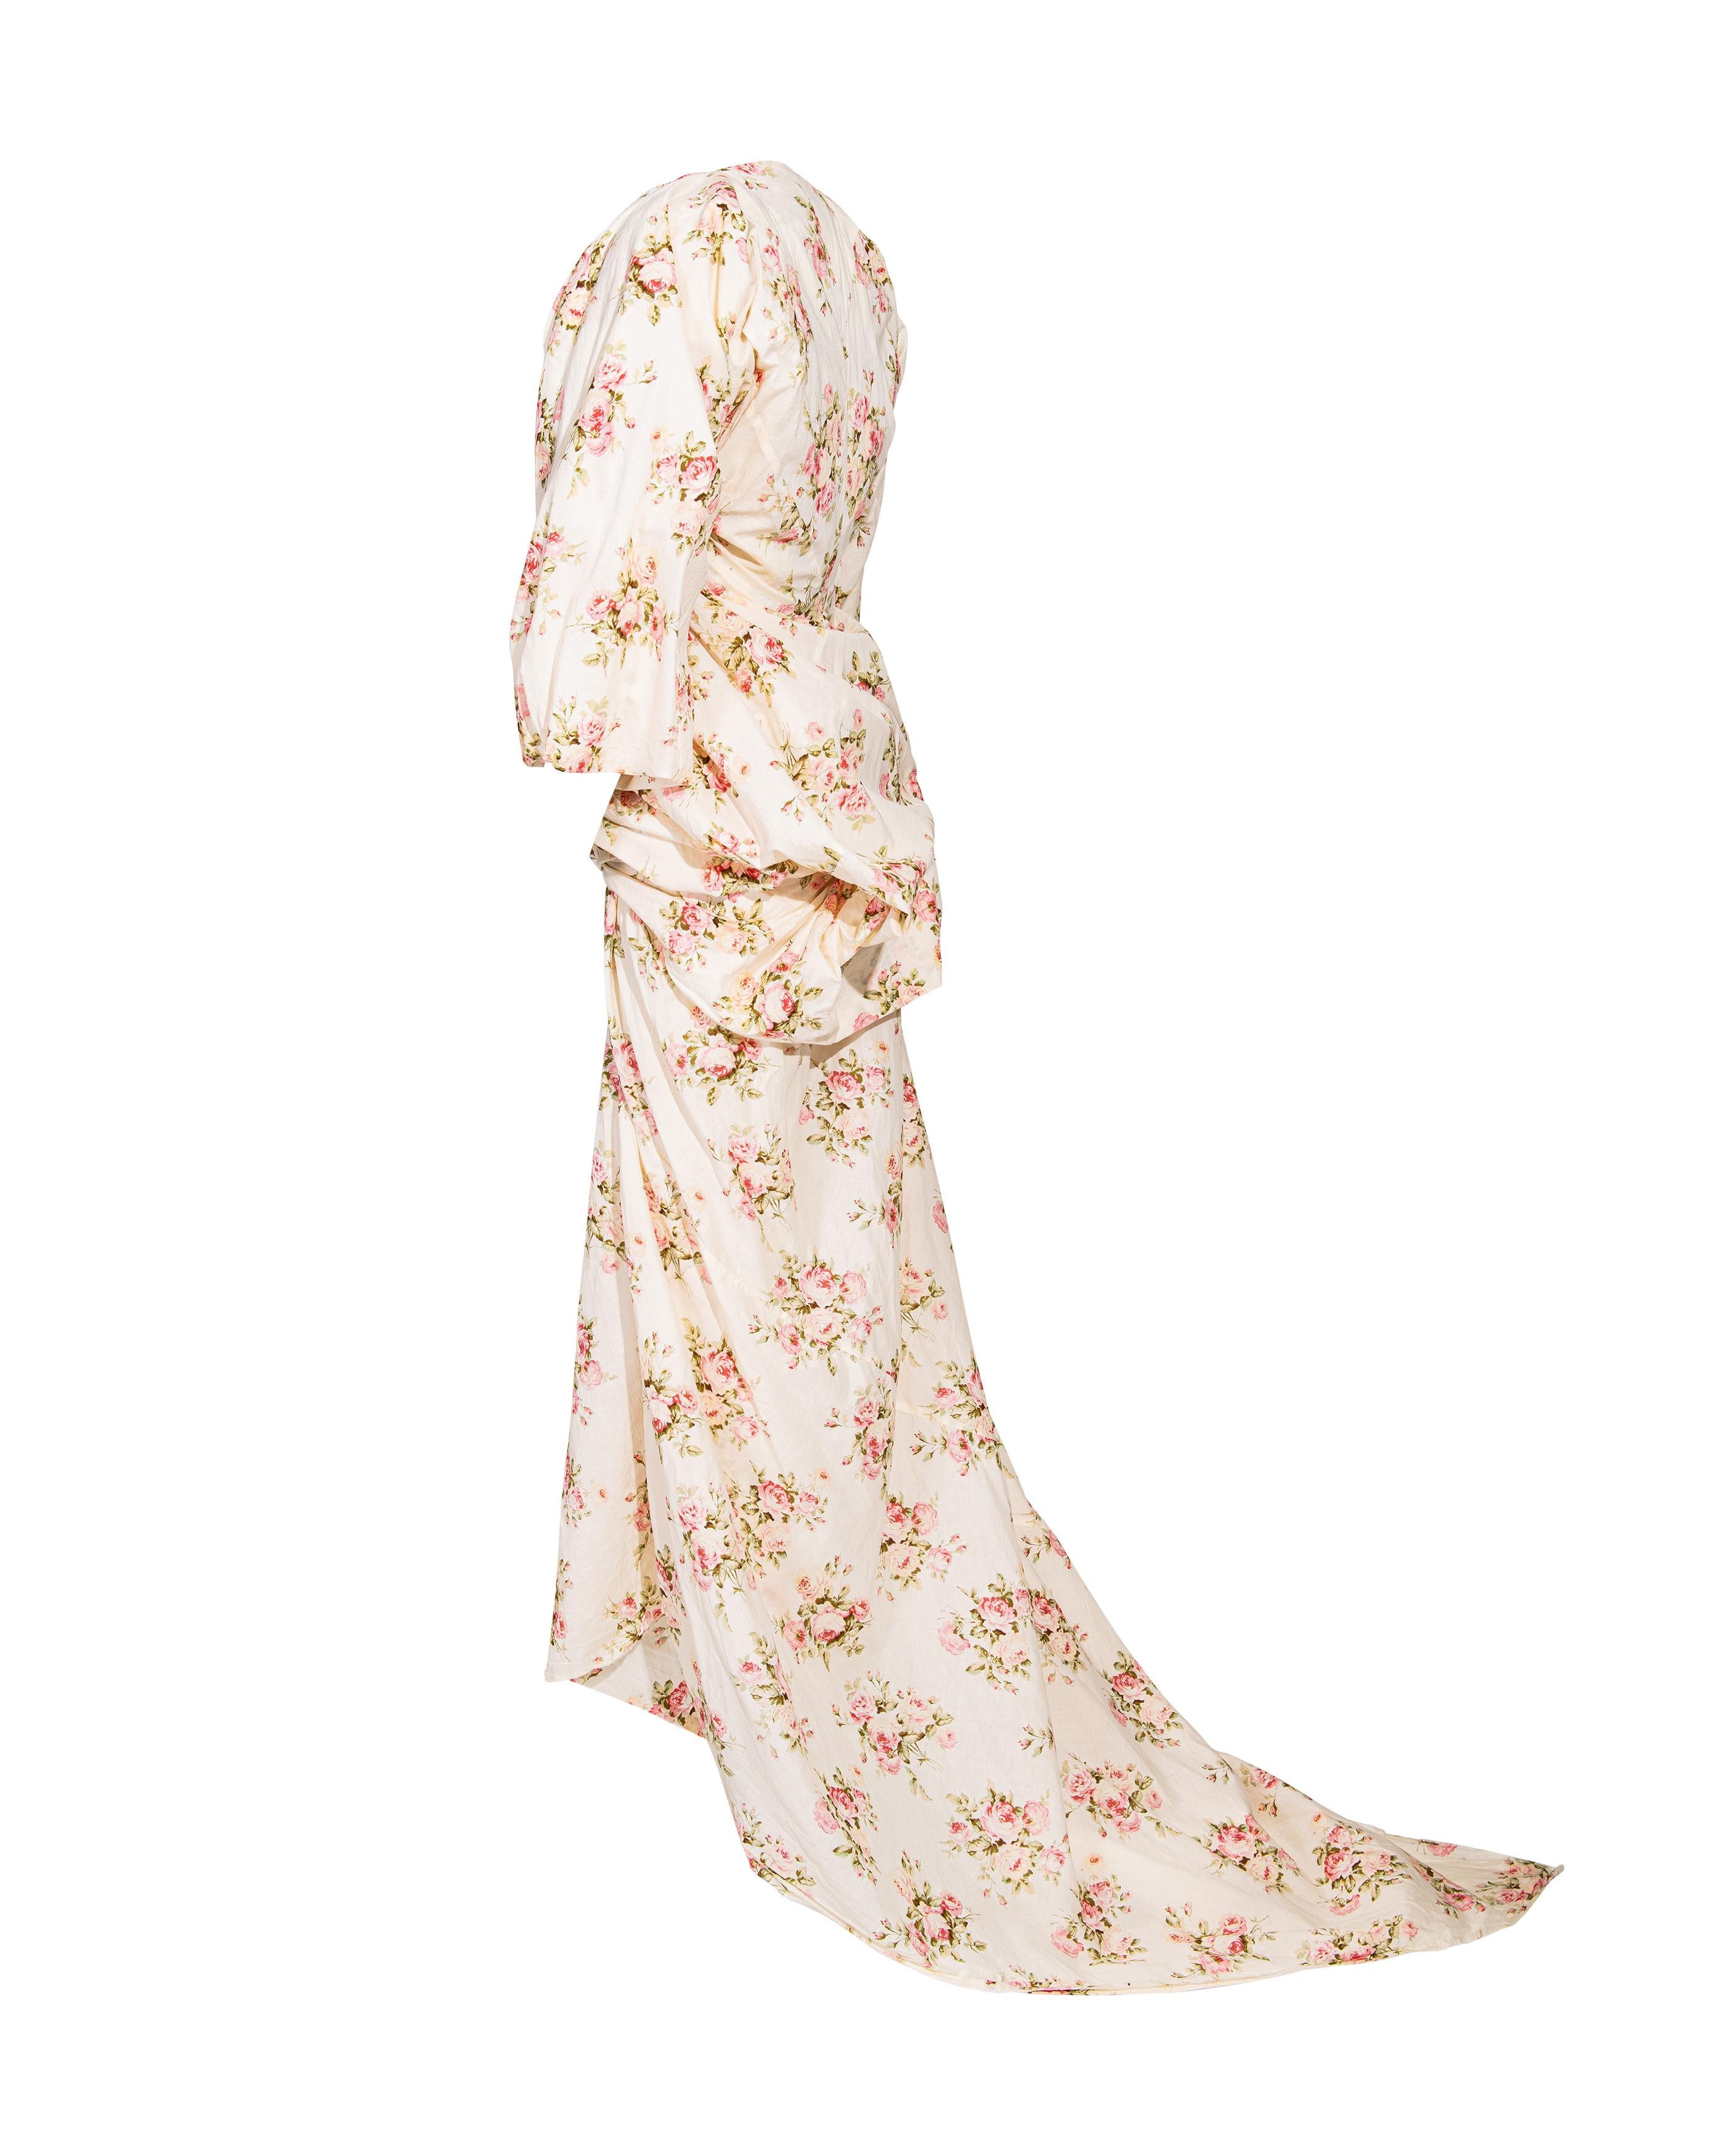 S/S 2008 Junya Watanabe Ecru Cotton Dress with Pink Floral Pattern For Sale 1